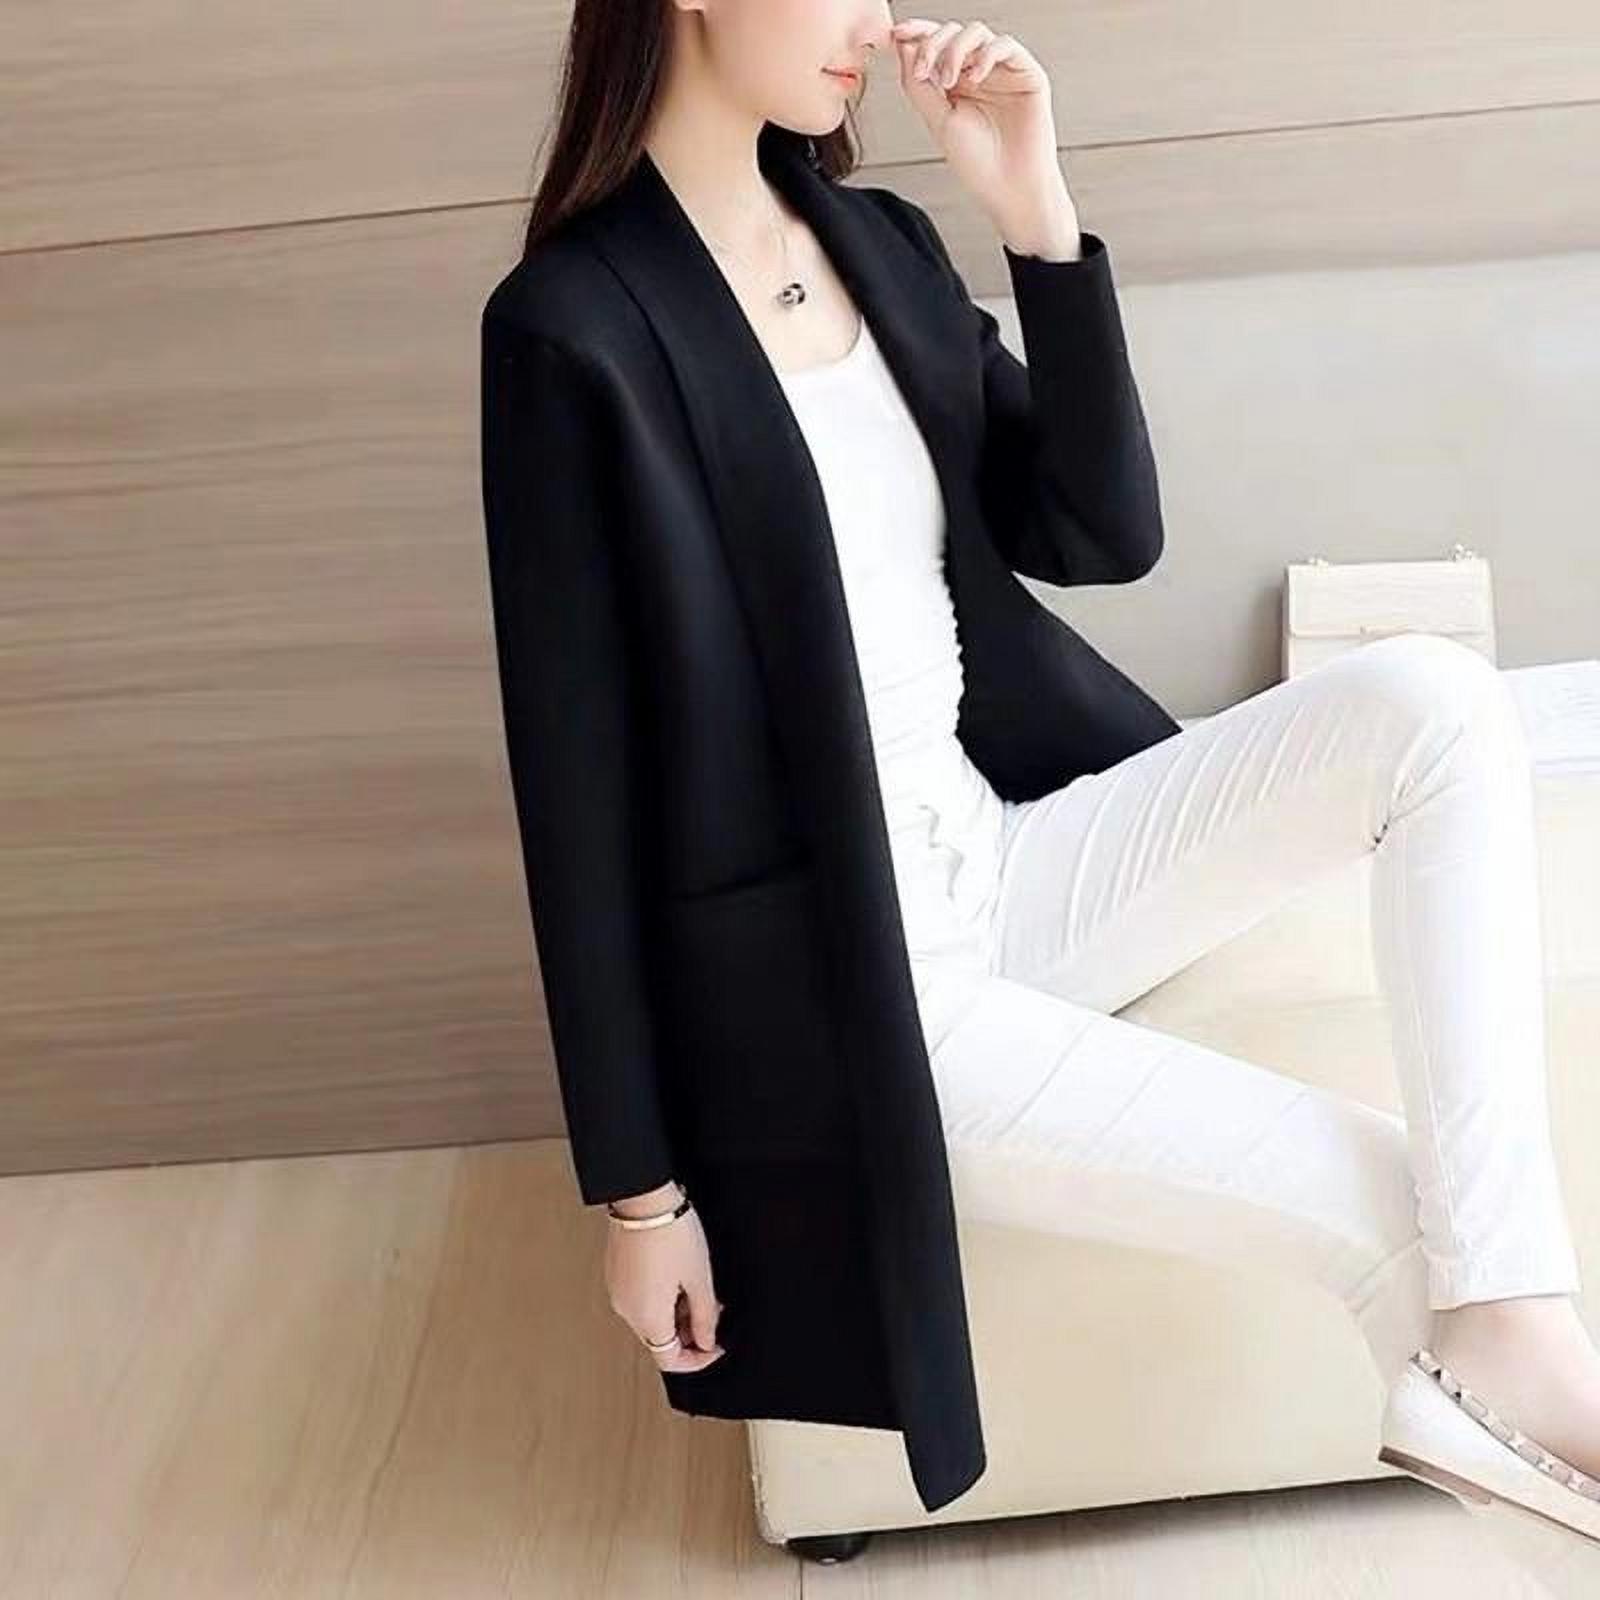 JANDEL Korean Style Loose Casual Solid Color Knit Cardigan Fashion Trend Long-sleeved Women's Coat, Women's Jacket, Long Coat - image 3 of 5